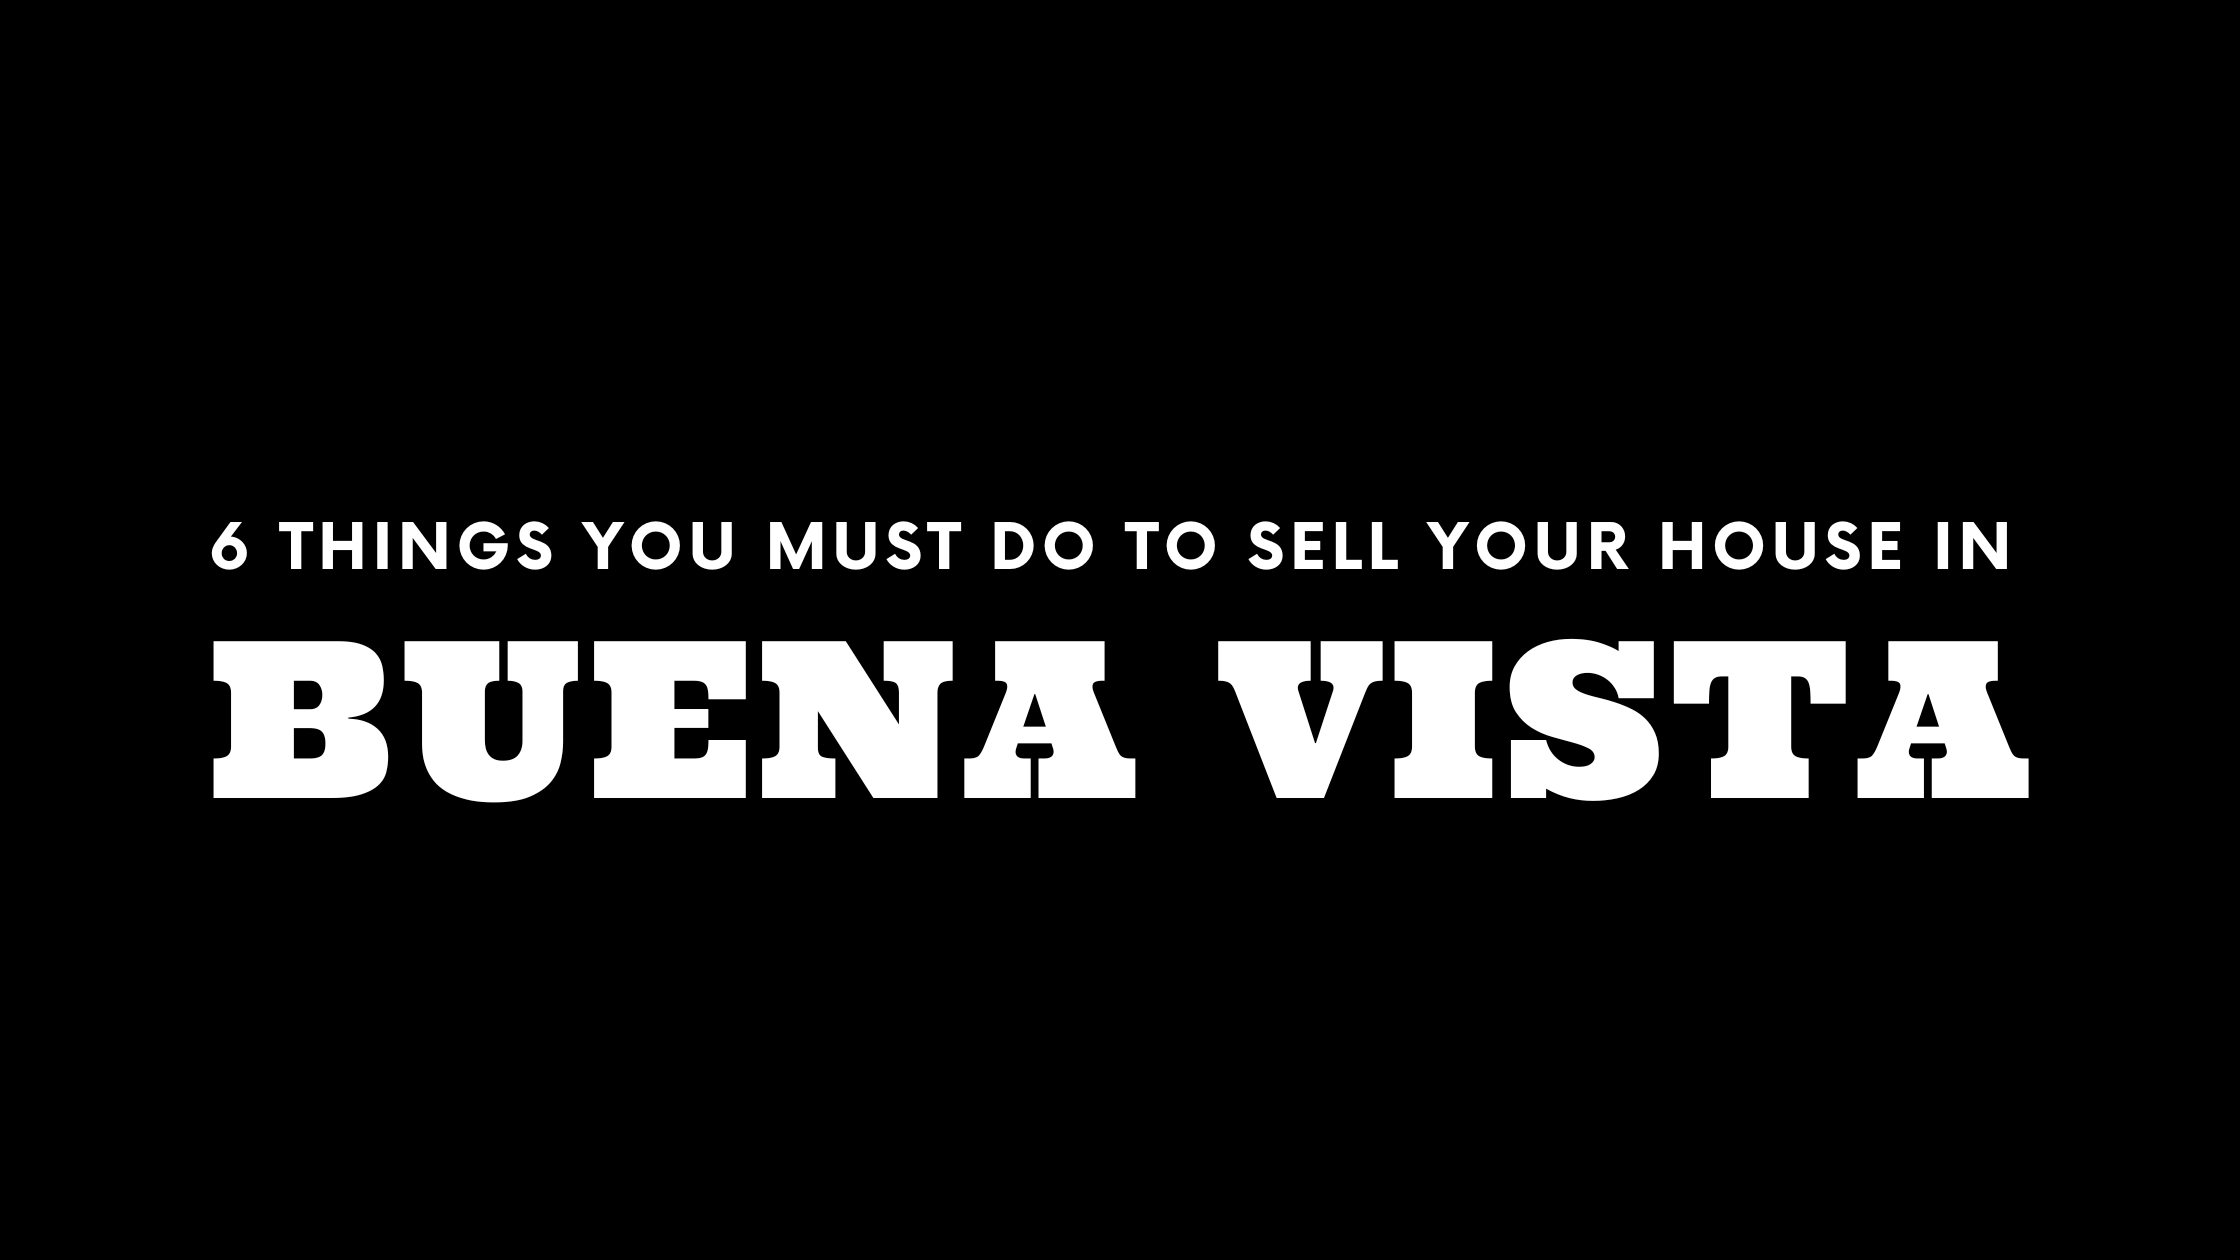 Selling Your House in Buena Vista? 6 Things You MUST Do!